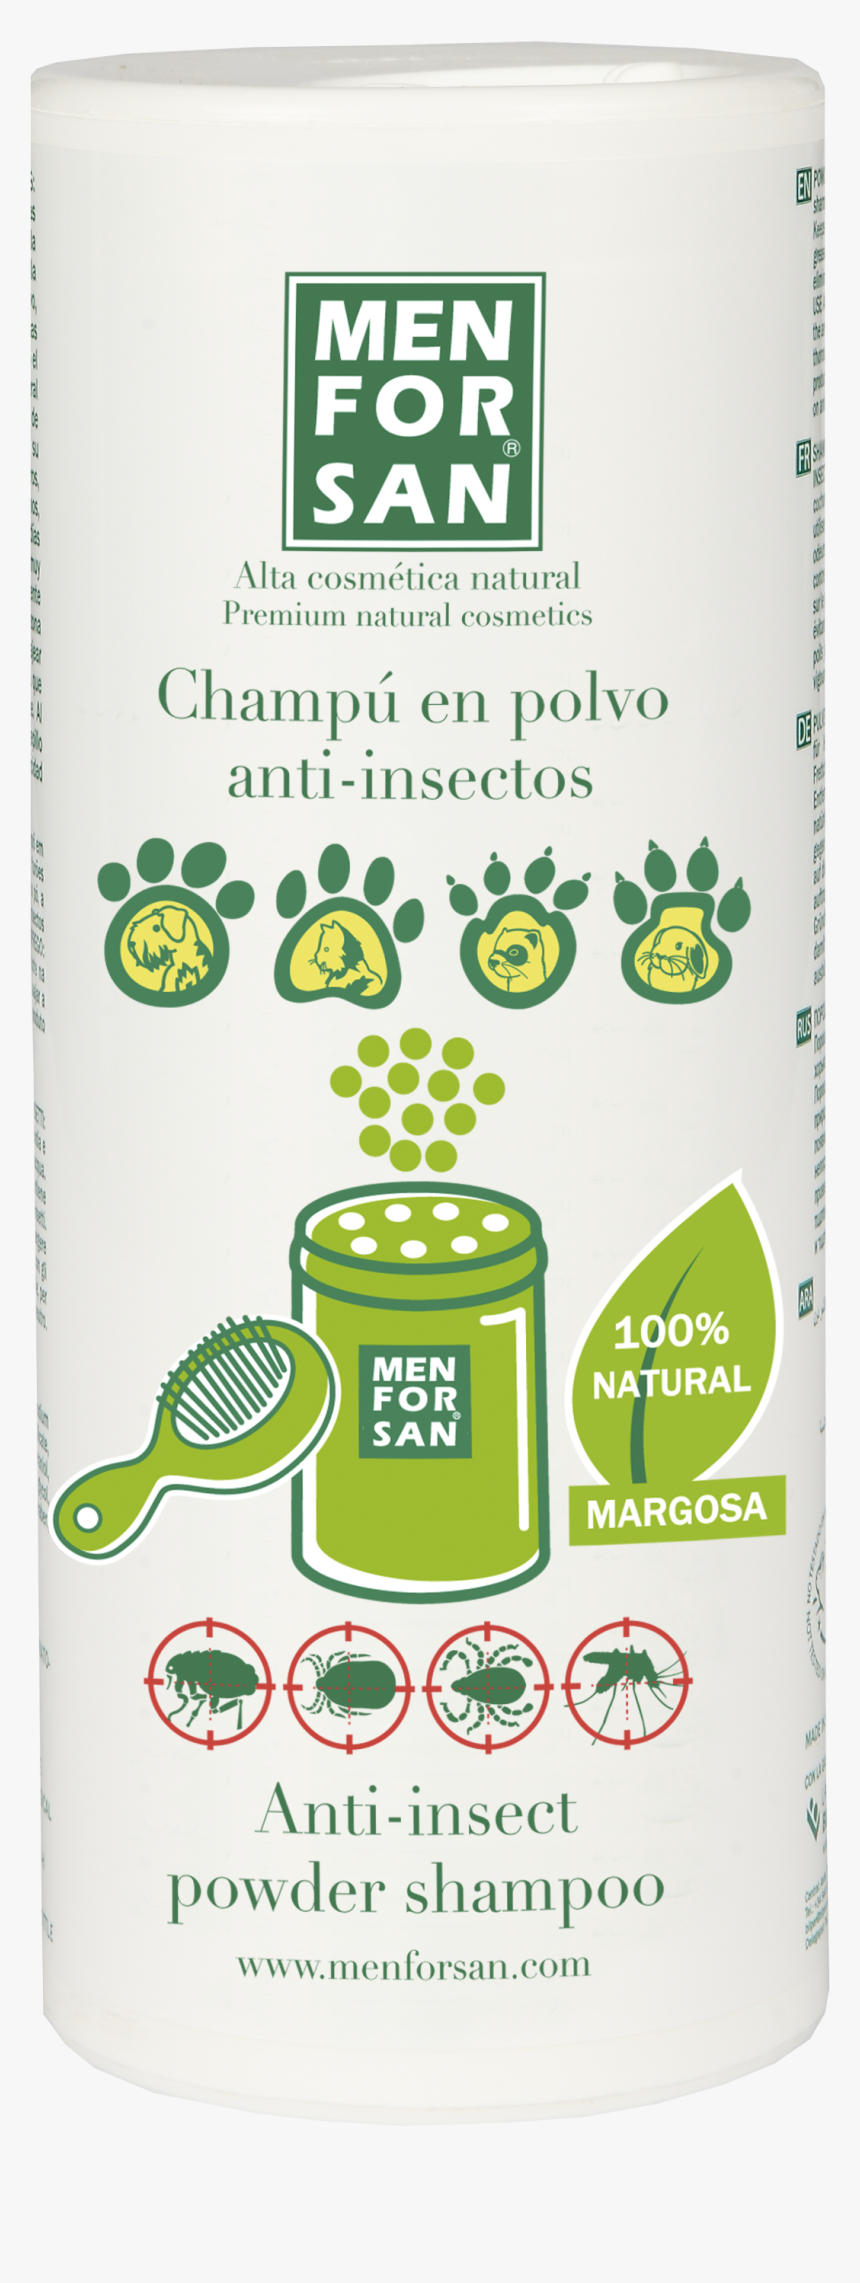 Powdered Shampoo With Insect Repellent - Men For San, HD Png Download, Free Download